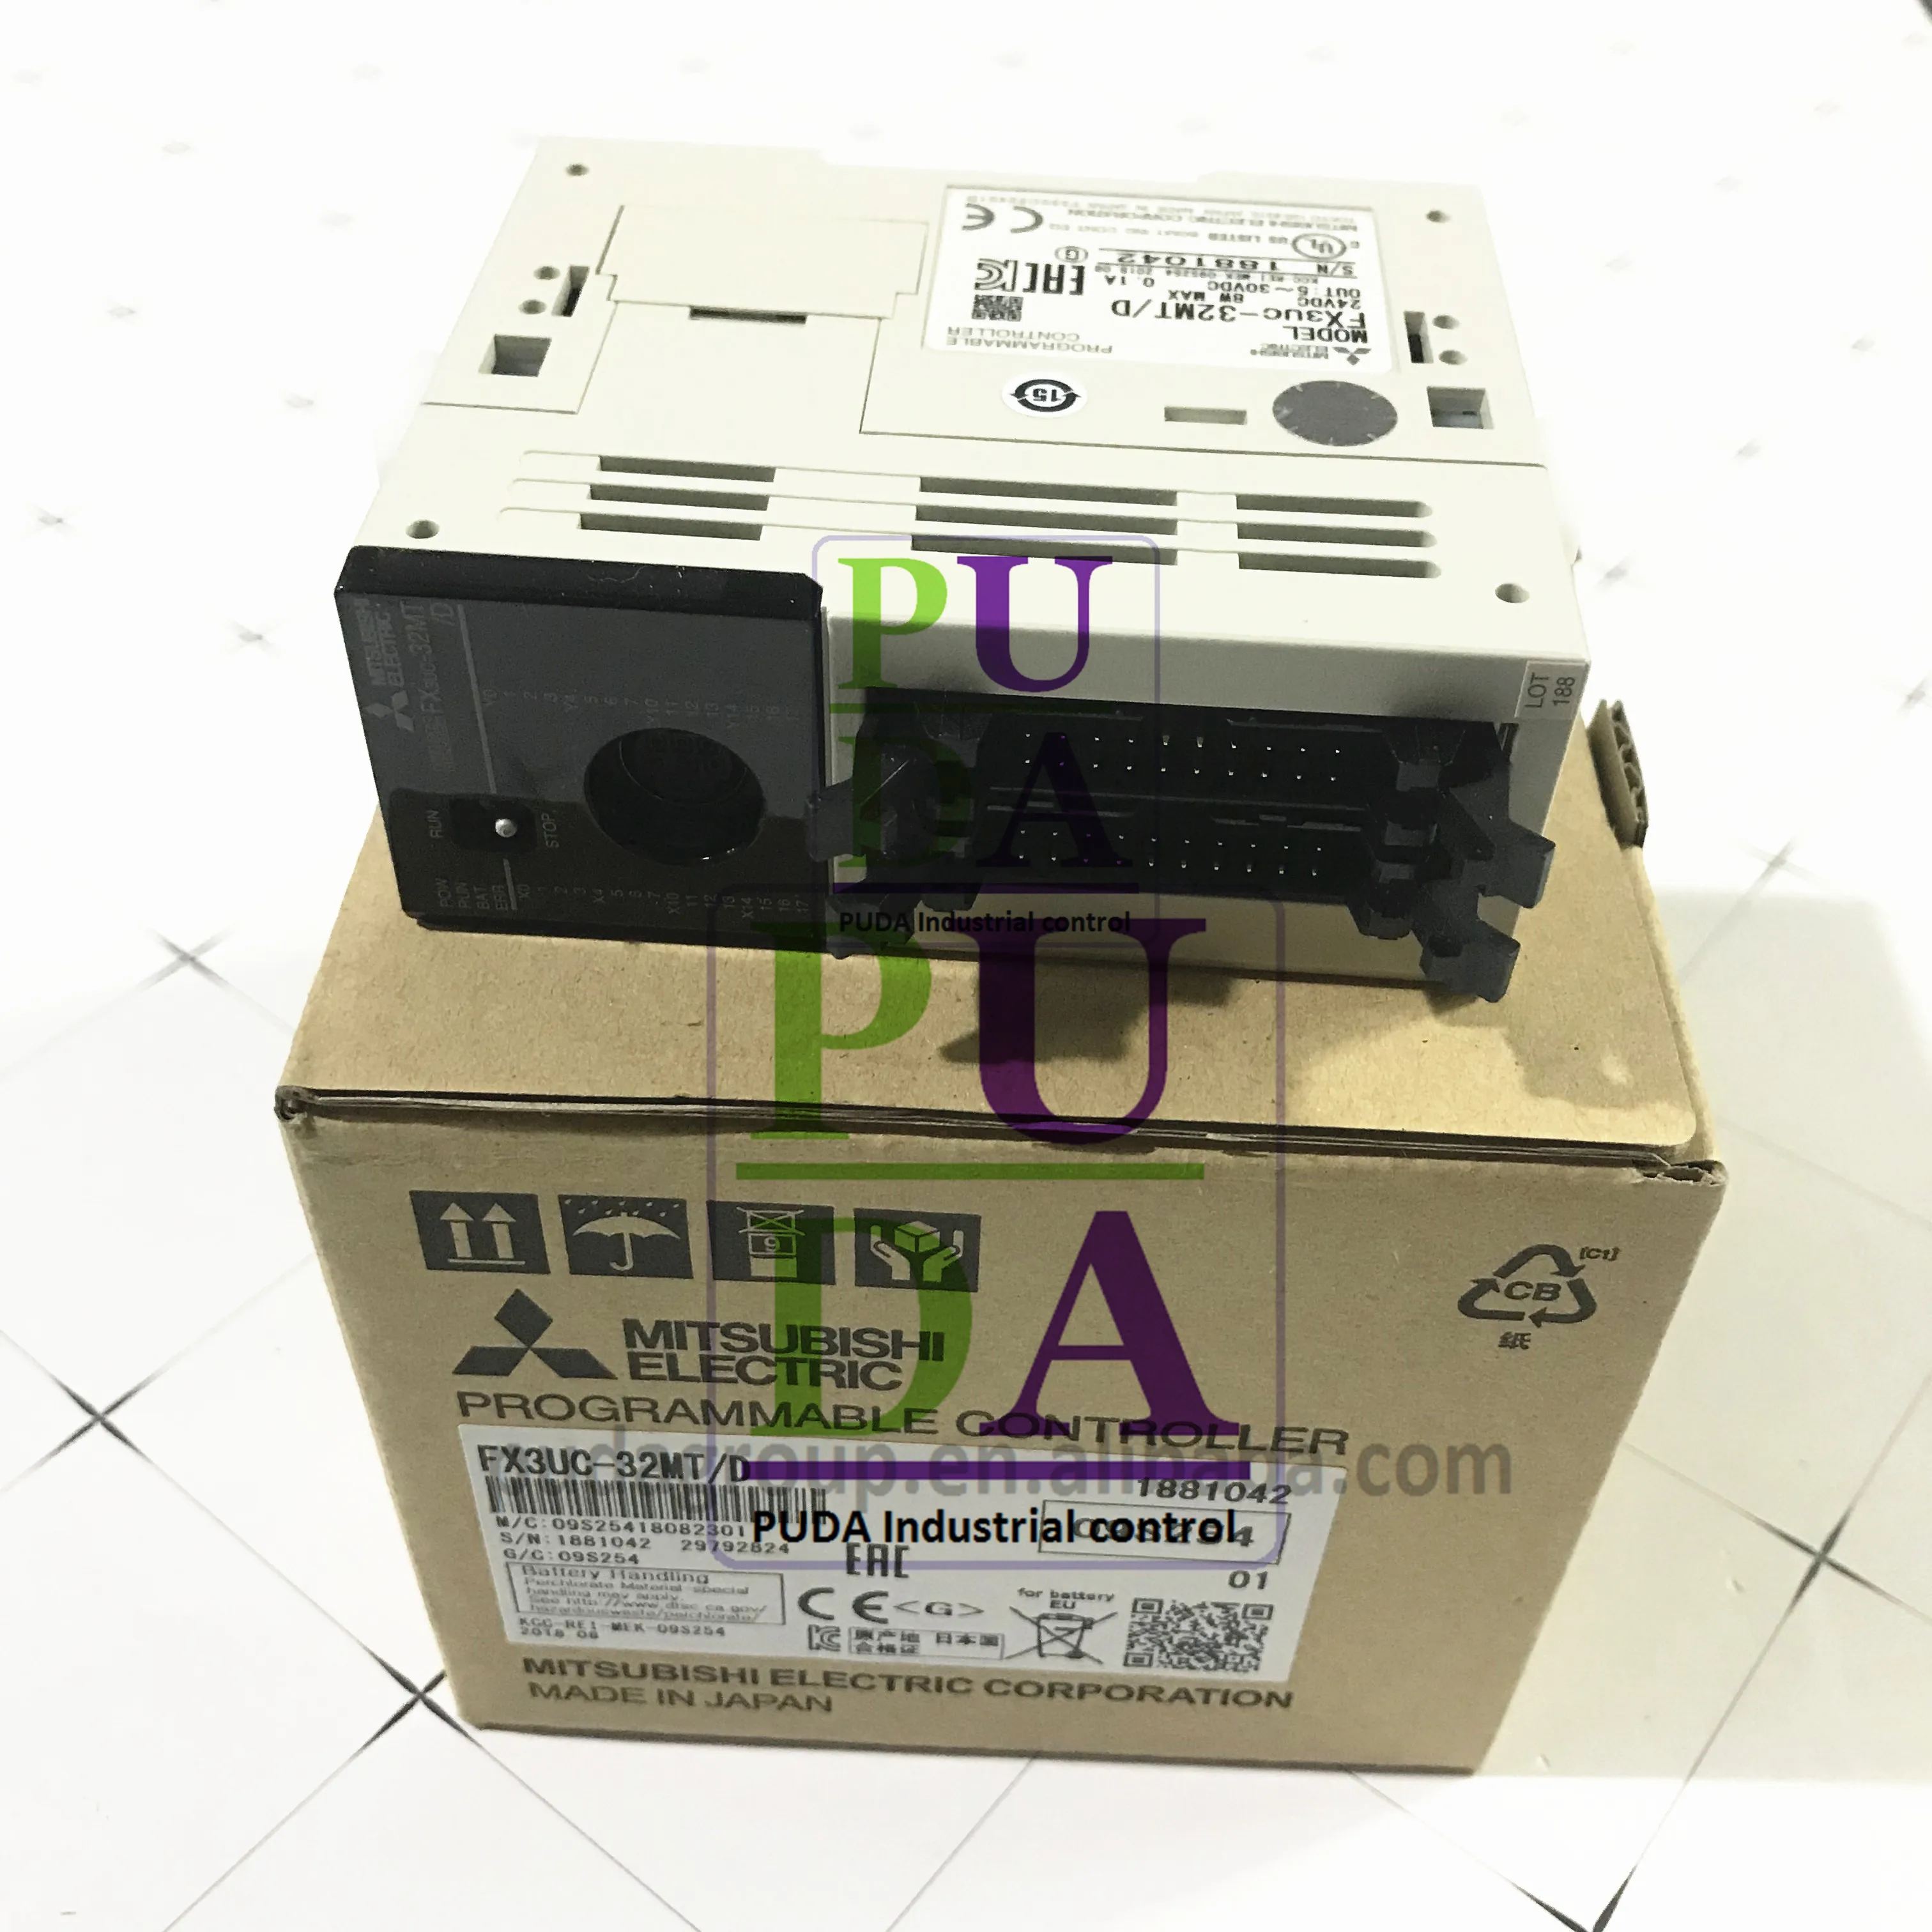 Wholesale spot goods for new Mitsubishi PLC FX3UC-32MT-D best price  warranty year FX3UC-32MT-D From